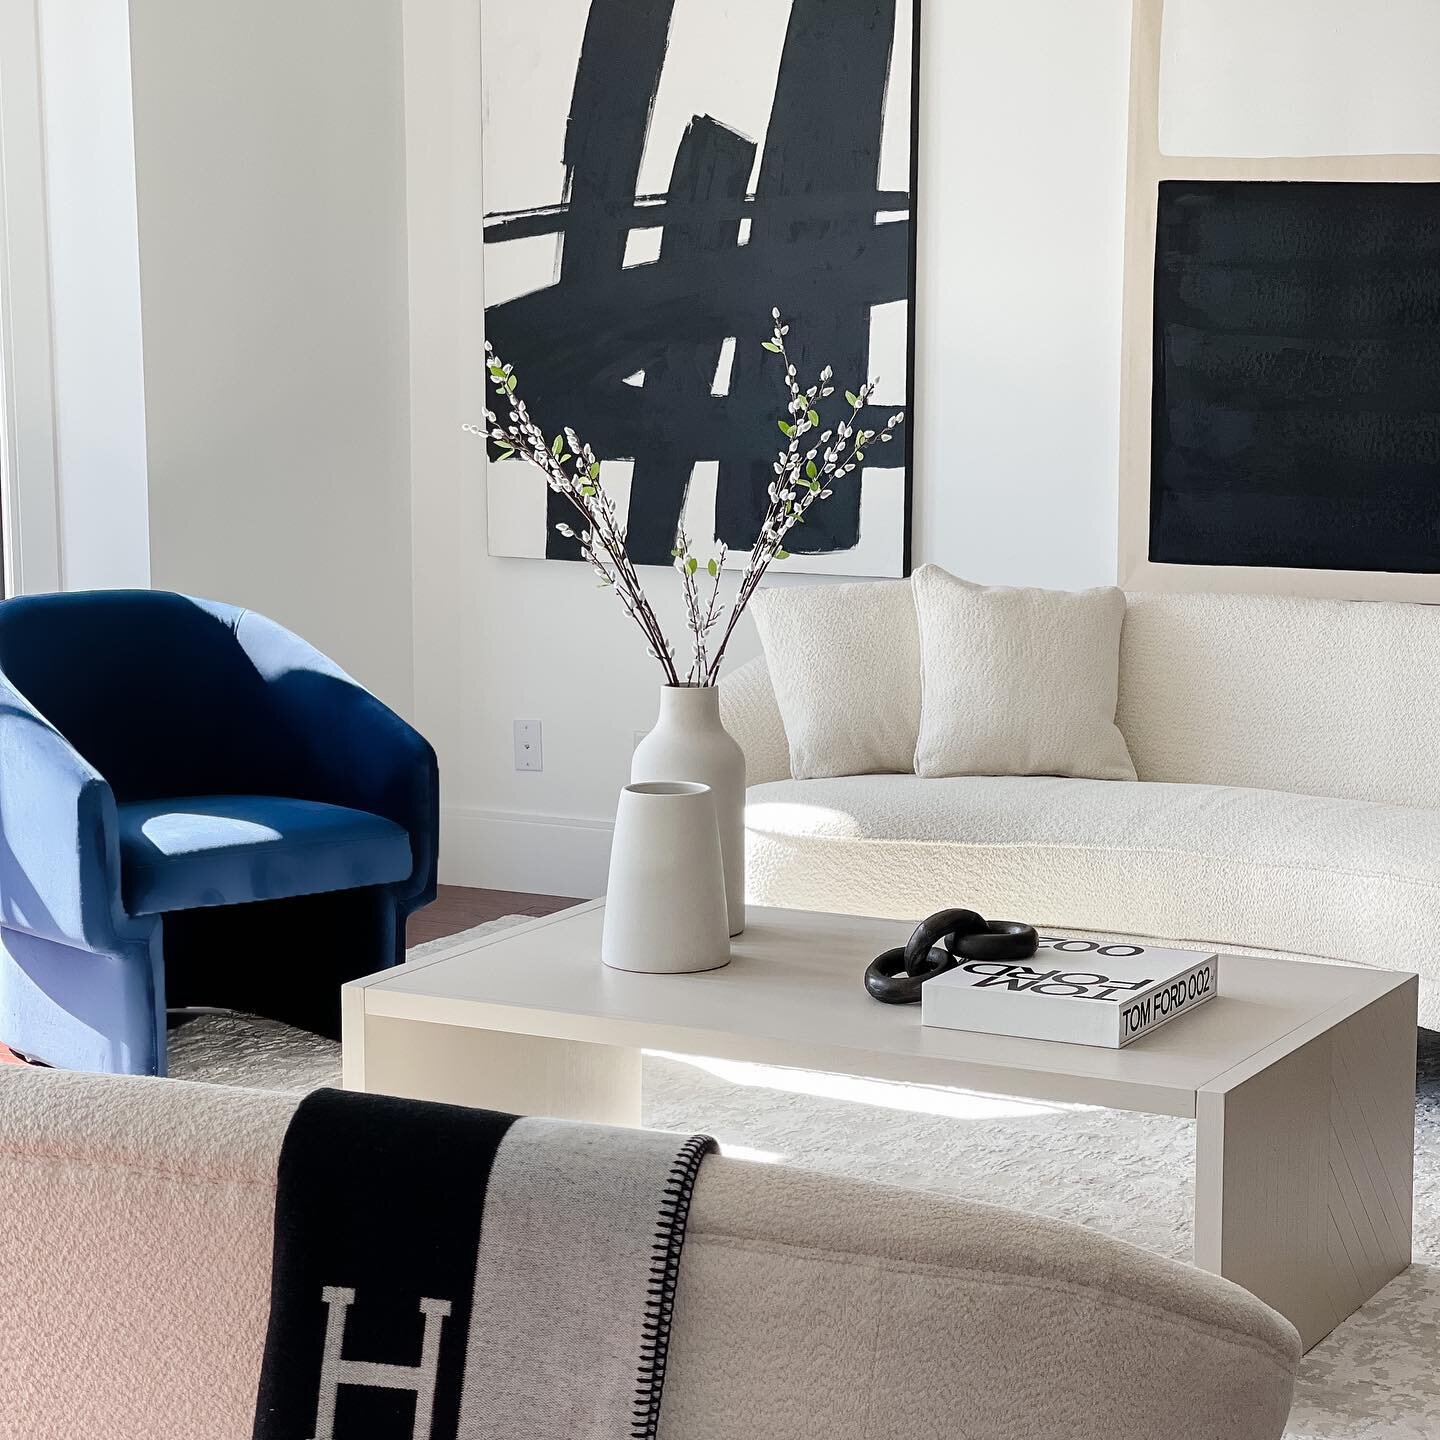 Elegant neutrals + a pop of blue 
Staged by: @ls.home.staging 
.
.
.
.

#interiordesign #interiors #designshare  #luxuryliving #luxuryhomestaging #homestaging #staginghouses #staginghomestosell #lshomestaging #homeideas #bostonhomestaging #bostonhome